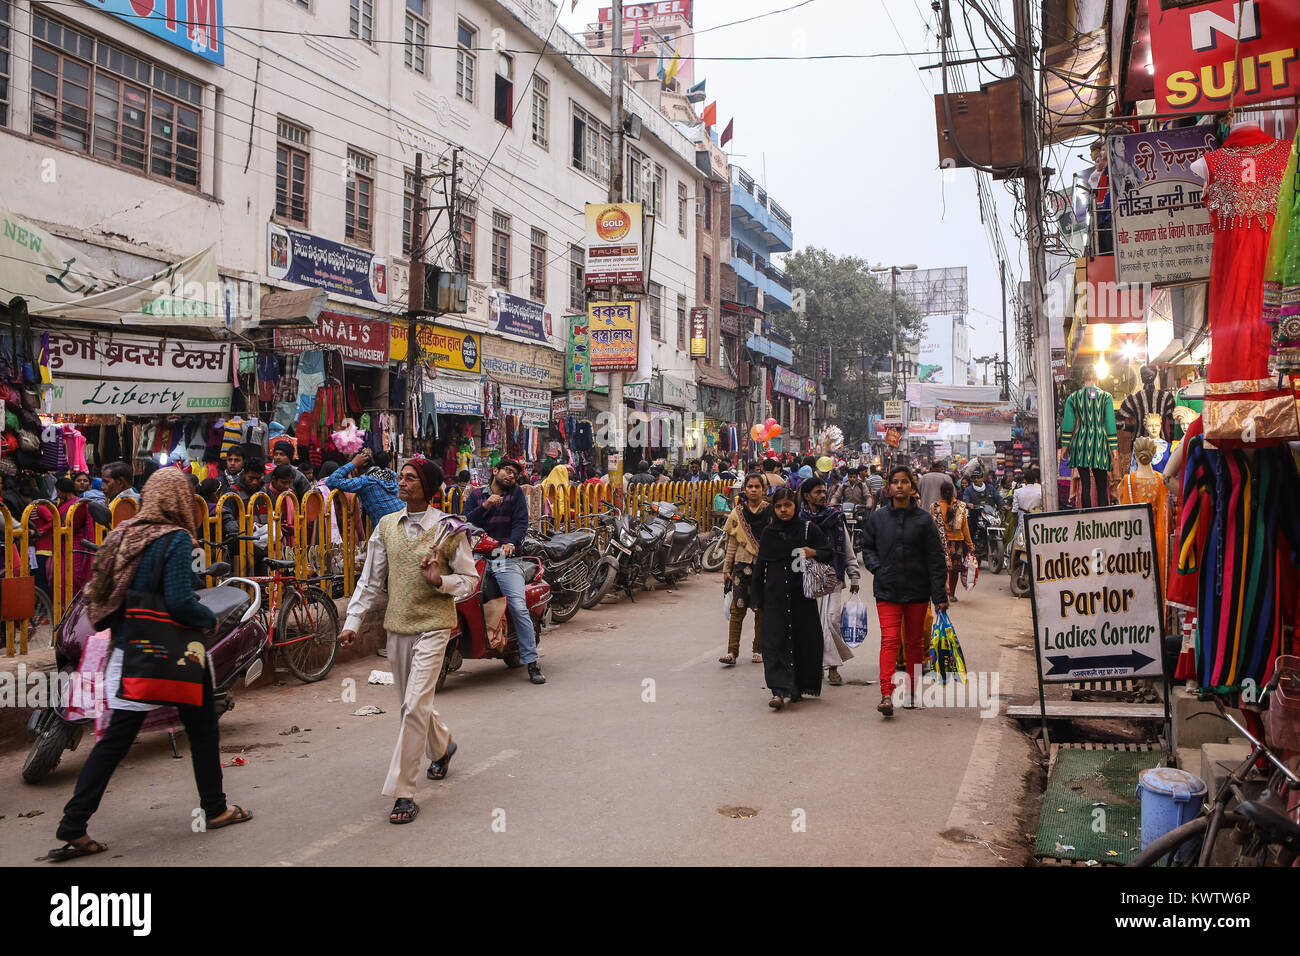 People movement on the busy indian street with old buildings at evening Stock Photo